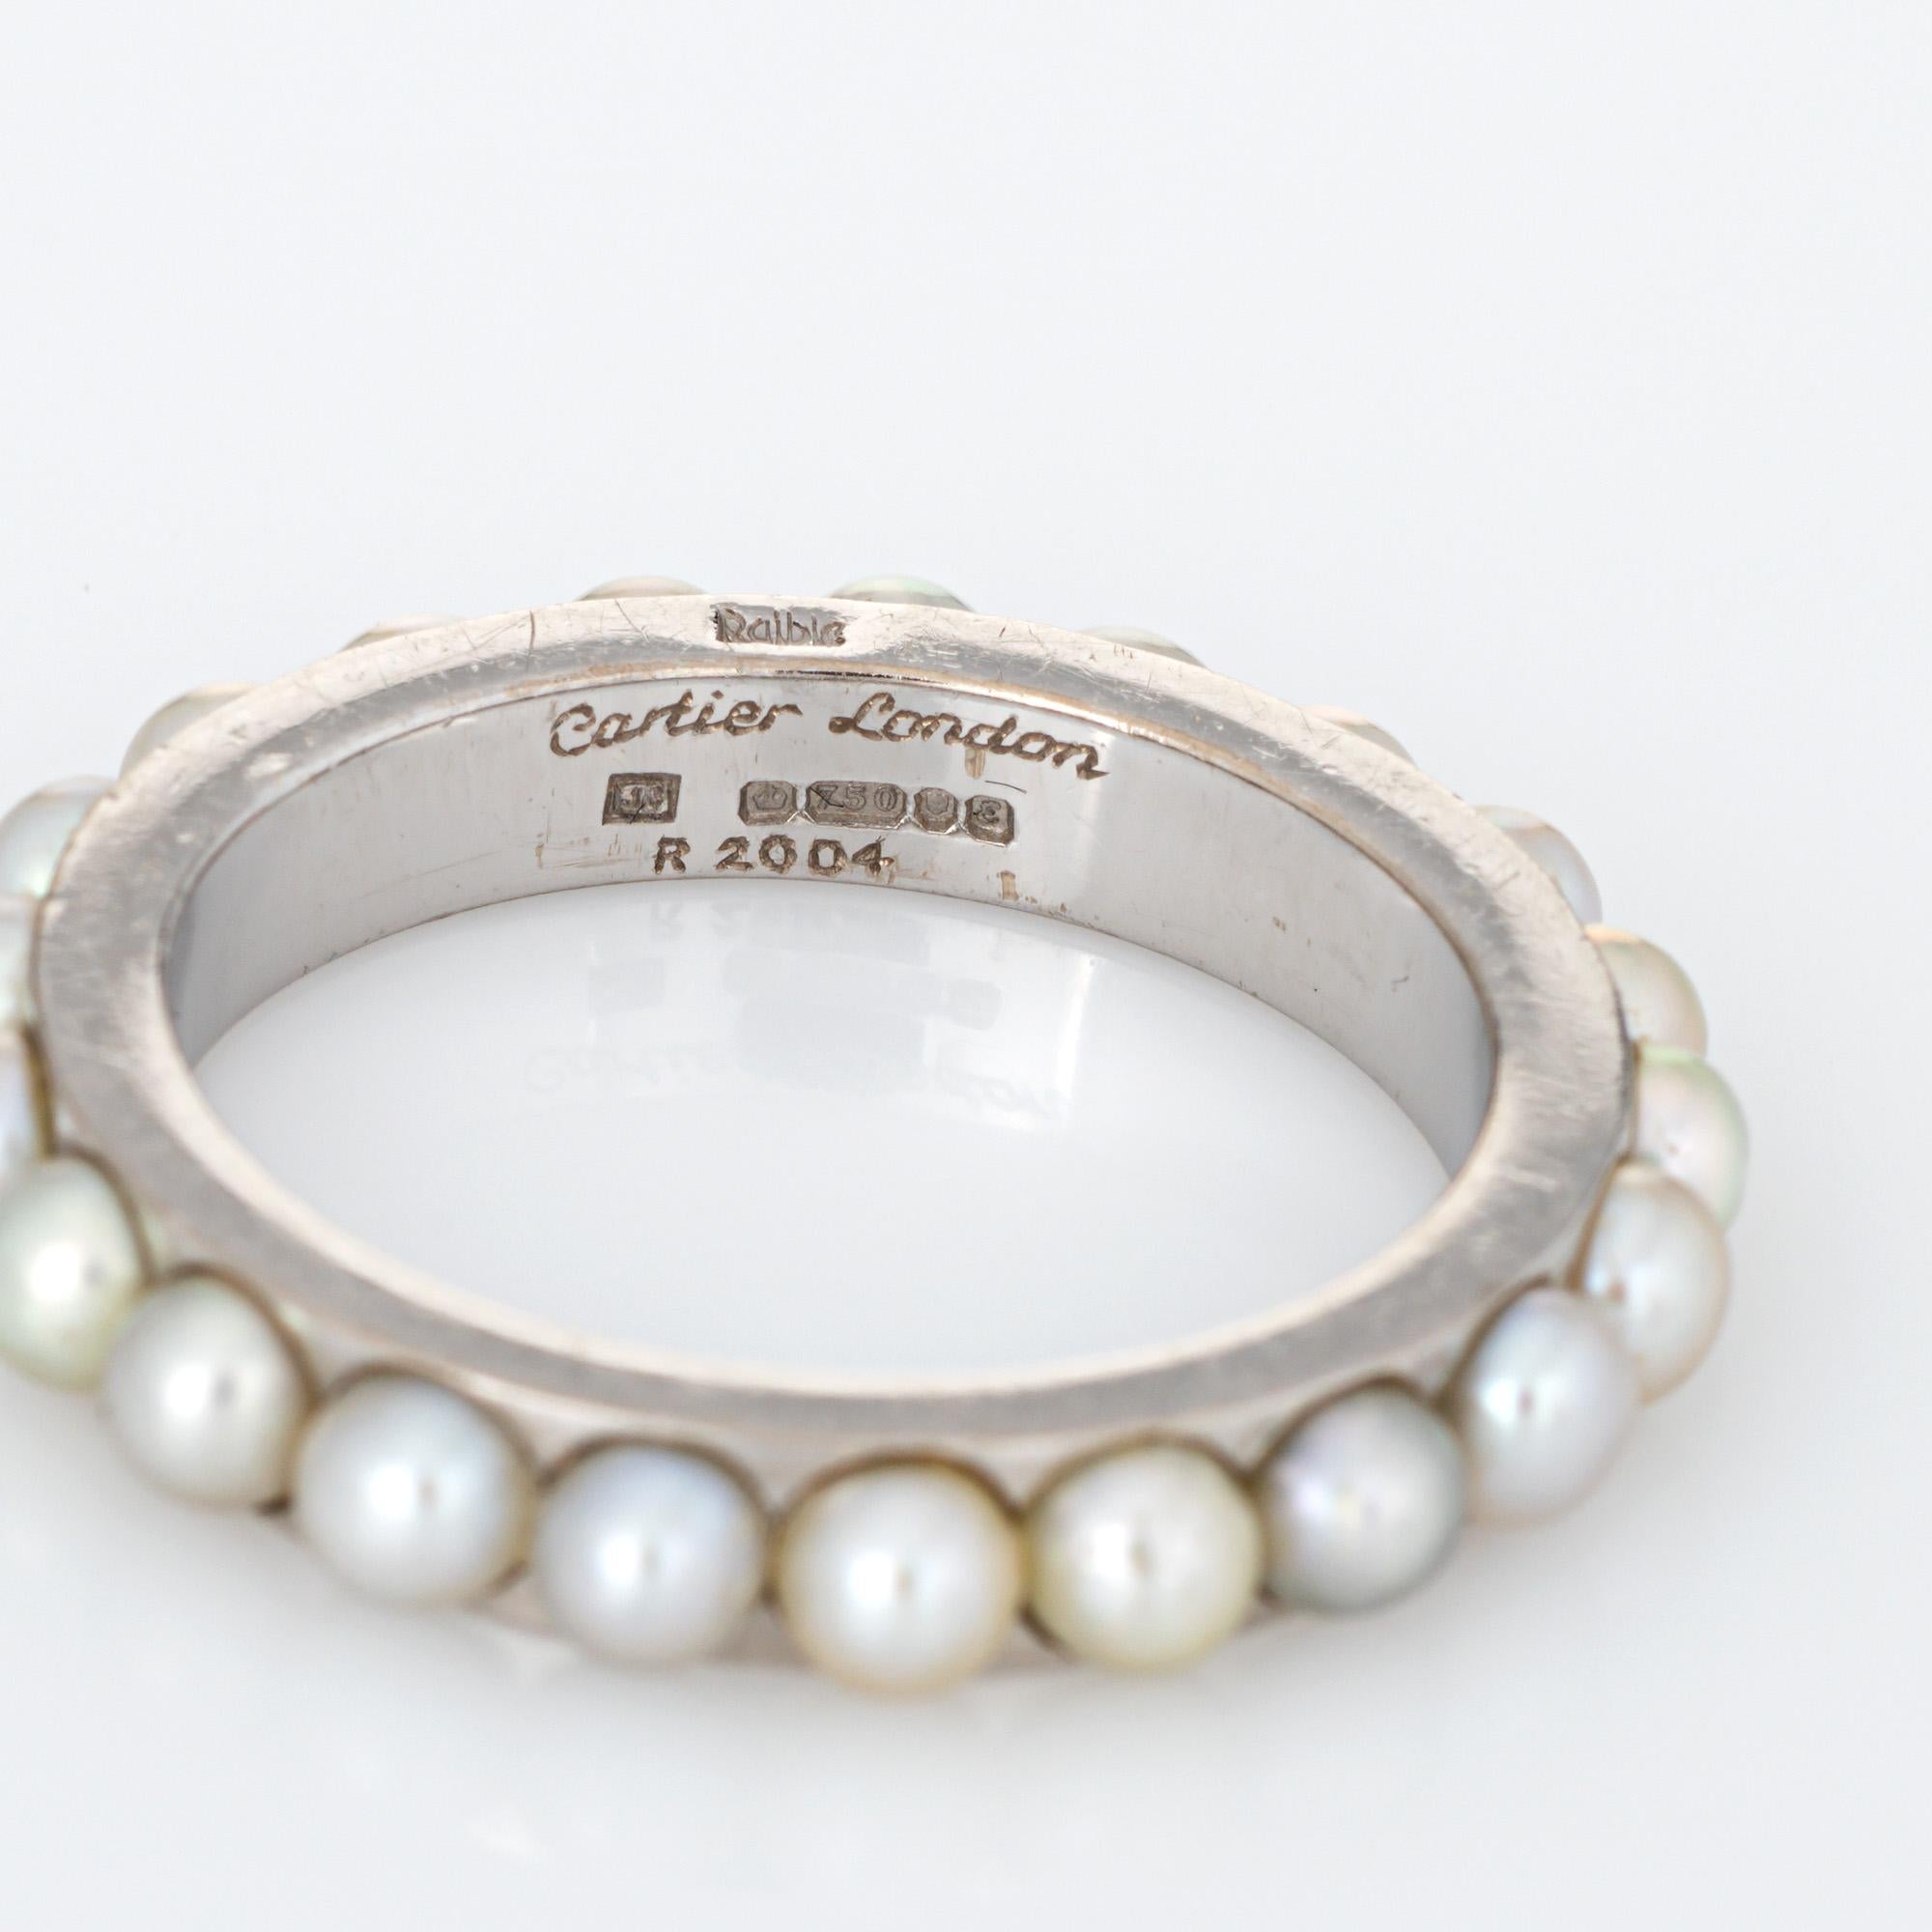 Round Cut Vintage Cartier London Pearl Eternity Ring c1979 Signed Jewelry Sz 7.5 Band